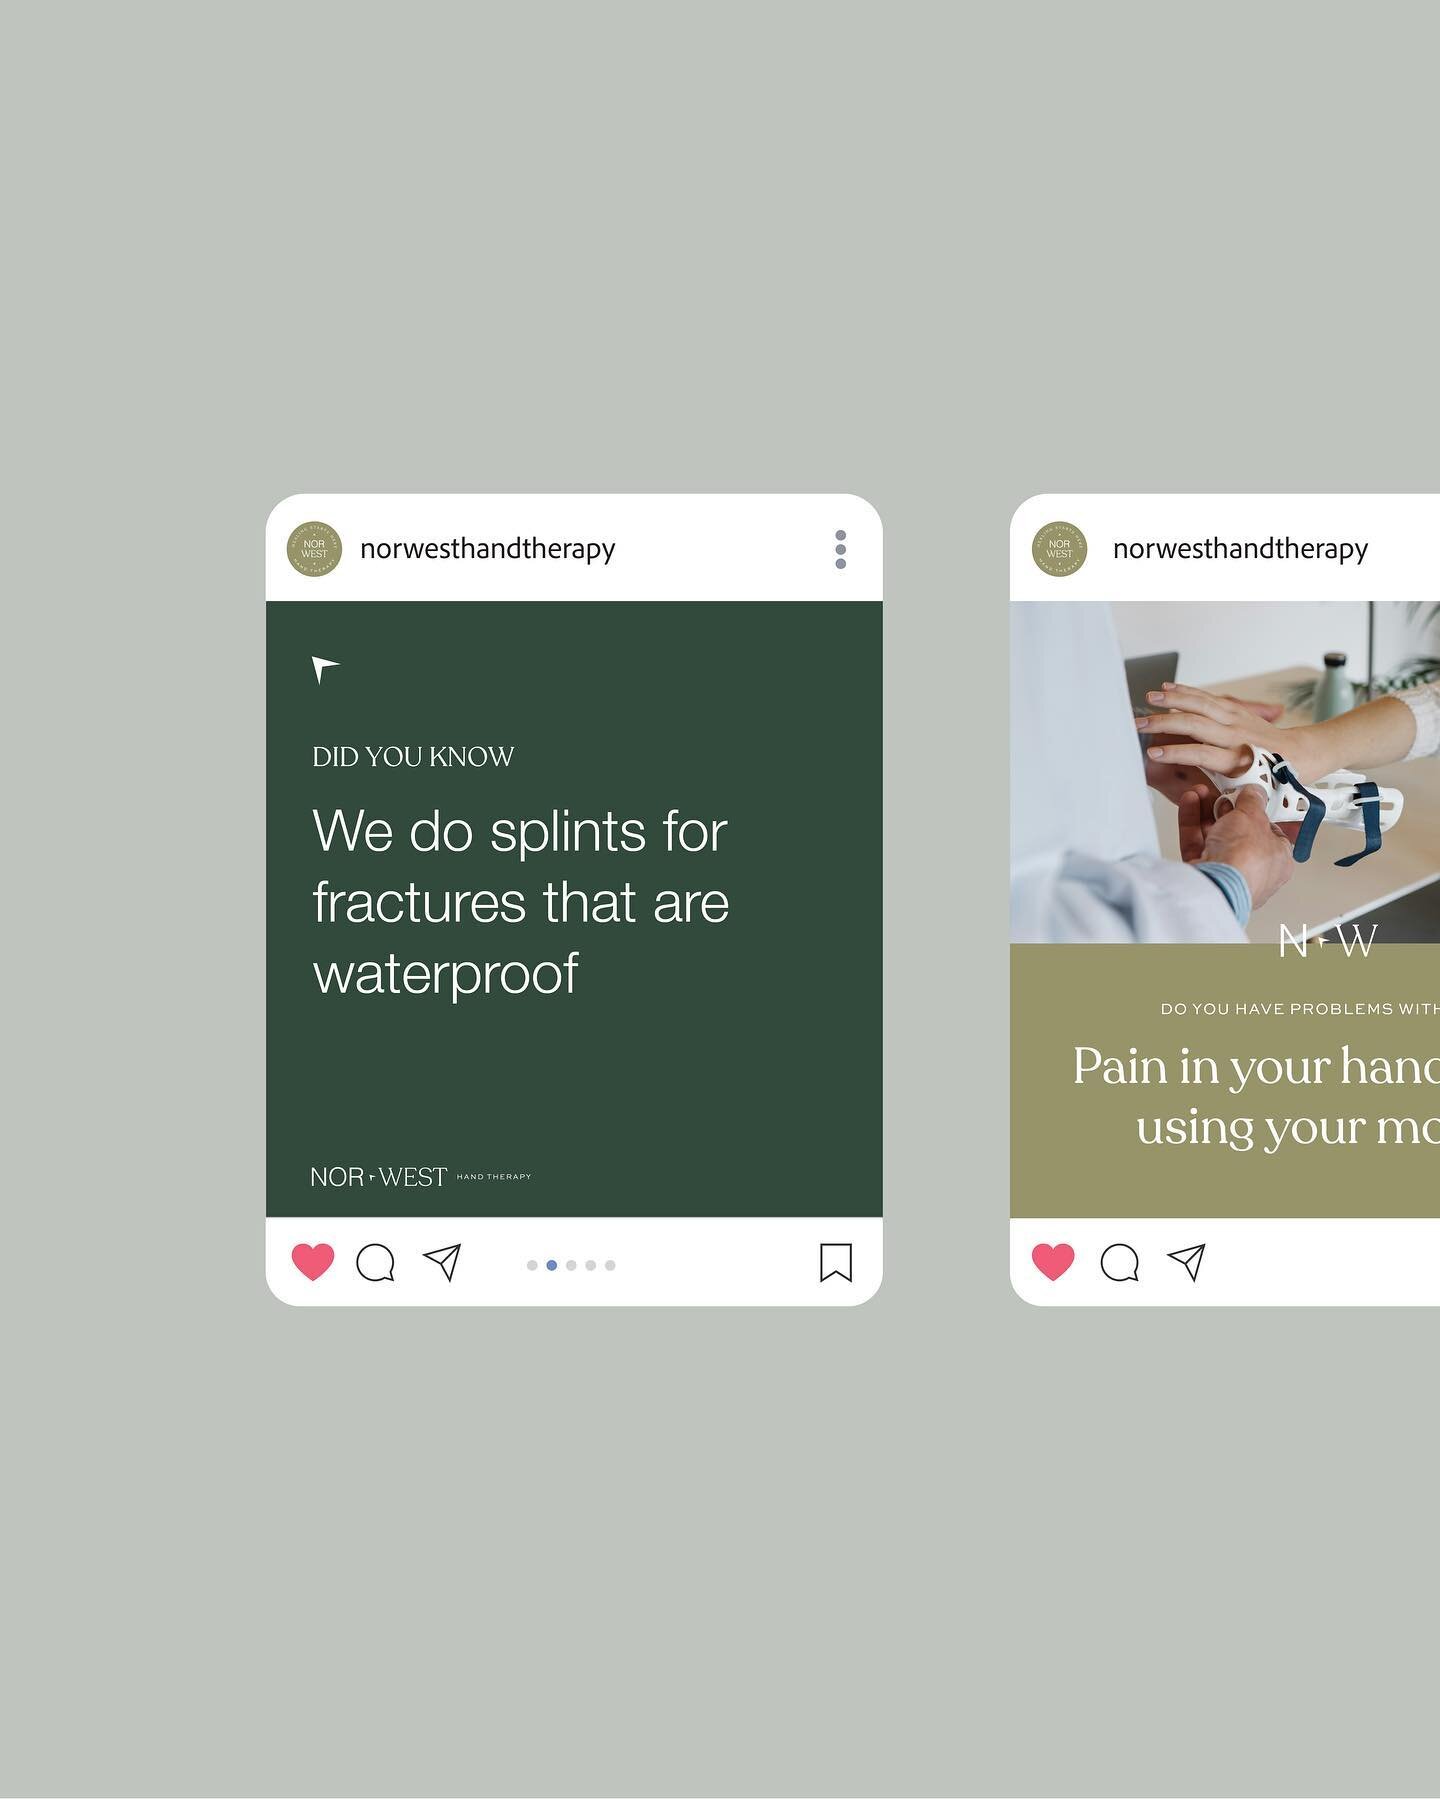 Instagram templates for Norwest Hand Therapy. Excited for their gram launch coming soon 💚

Ready to level up your Gram game? Imagine a world where your Insta posts are perfectly on brand, mapped out in advanced and supplied ready to hit that &ldquo;